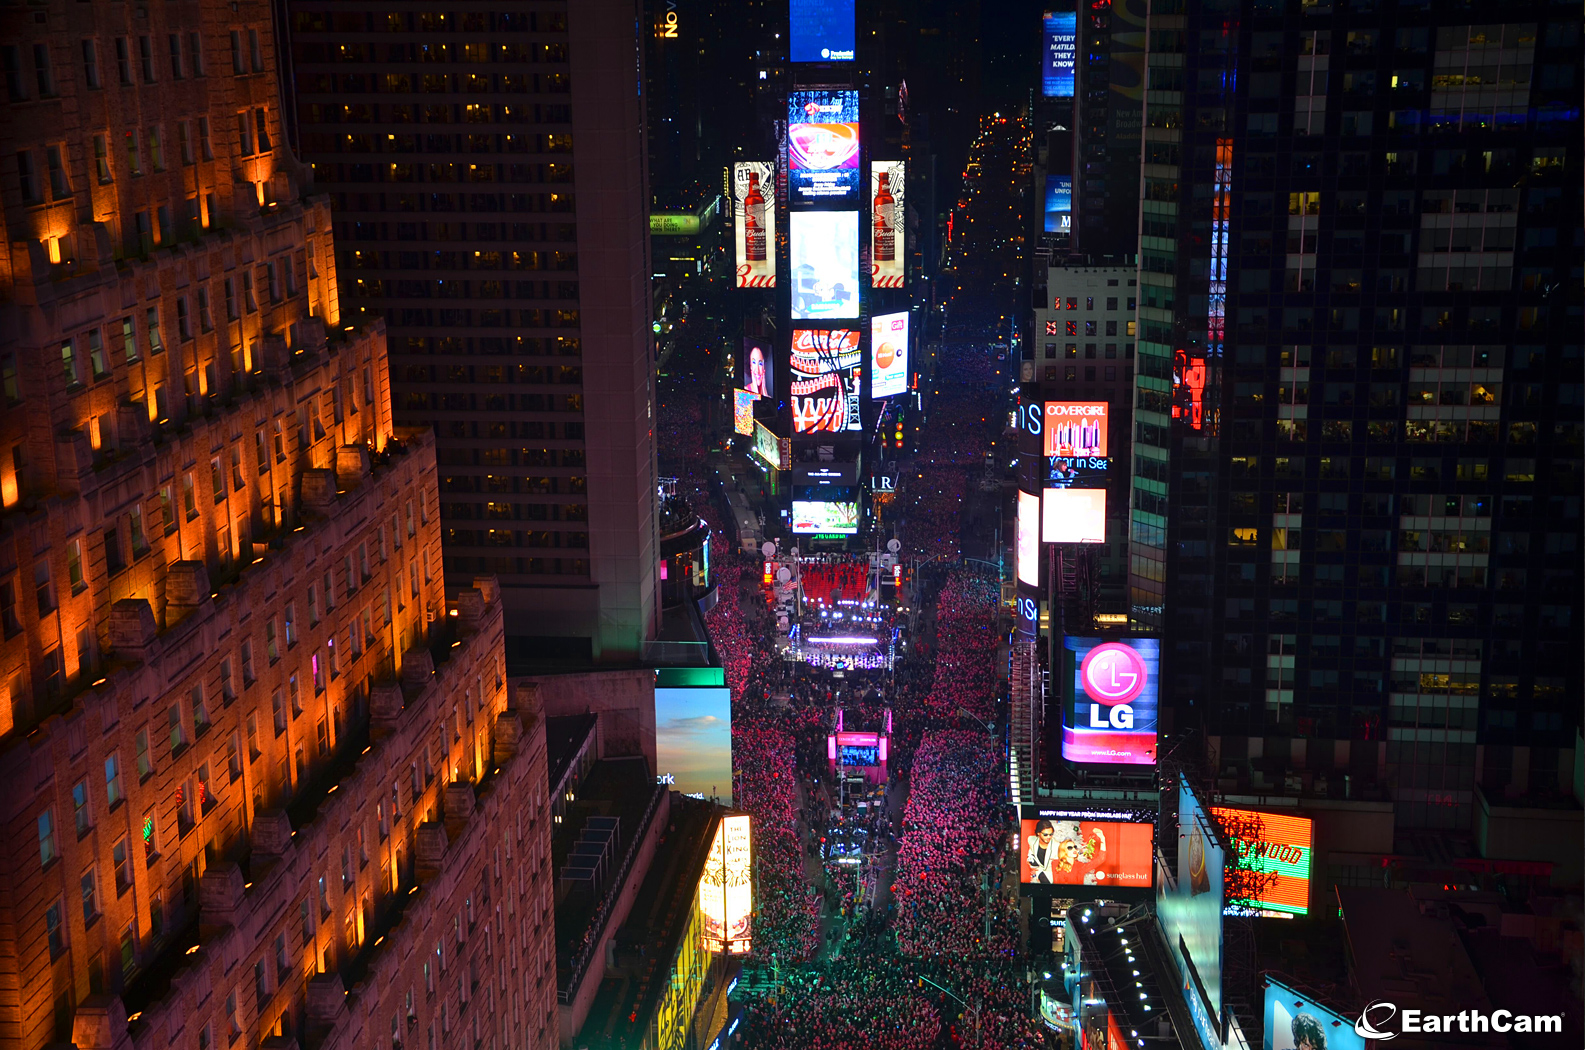 EarthCam Introduces New Webcam Technology in Times Square